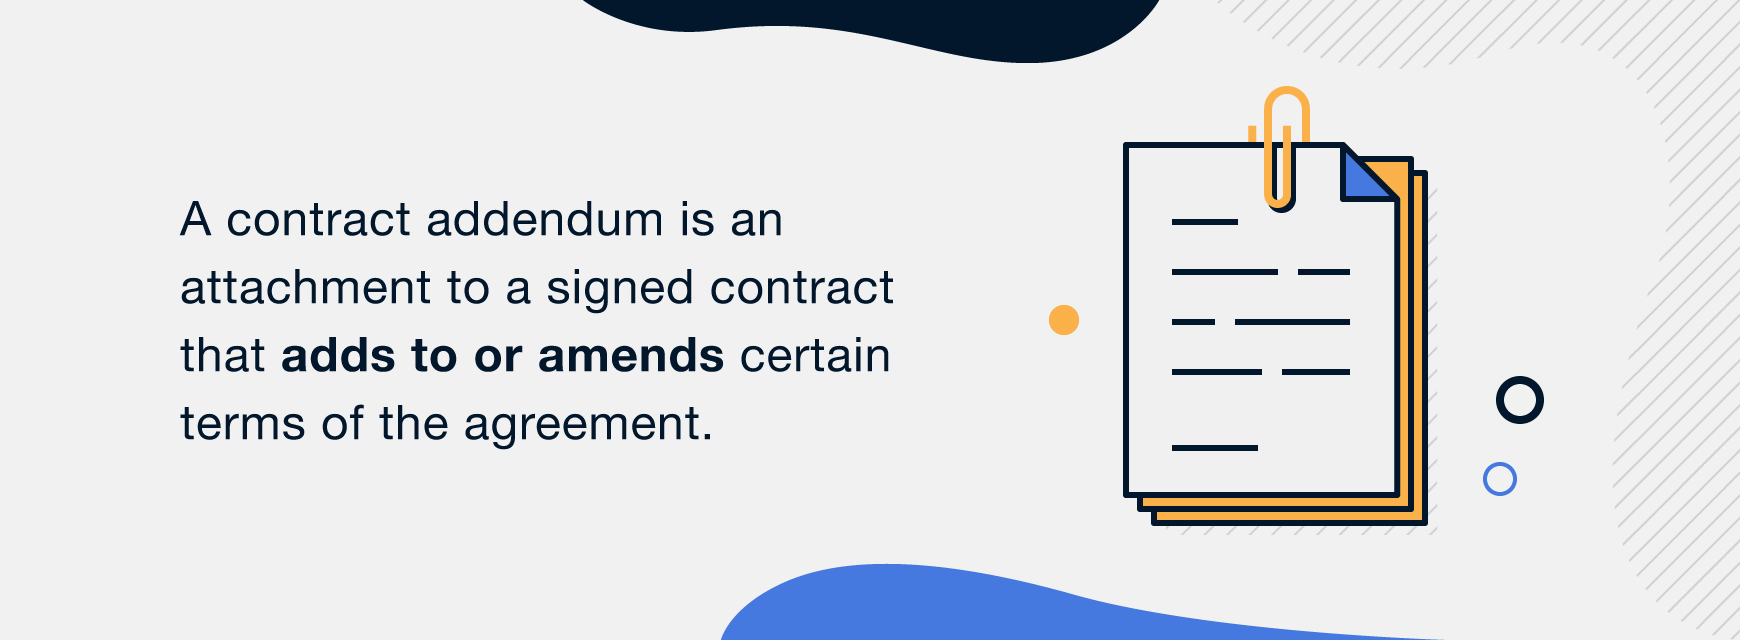 A contract addendum is an attachment to a signed contract that adds to or amends certain terms of the agreement.